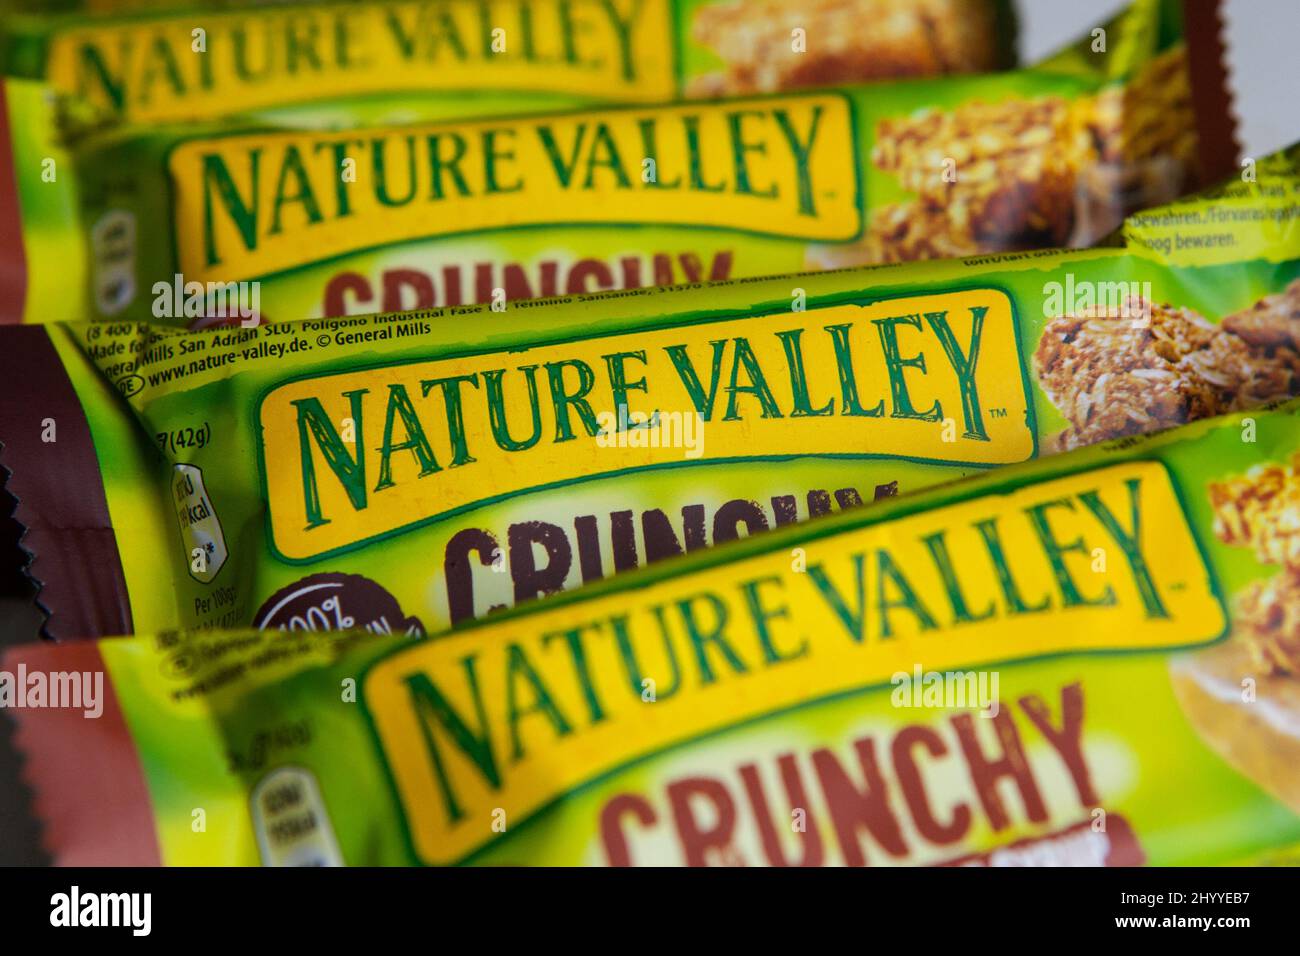 Nature Valley protein bars Stock Photo